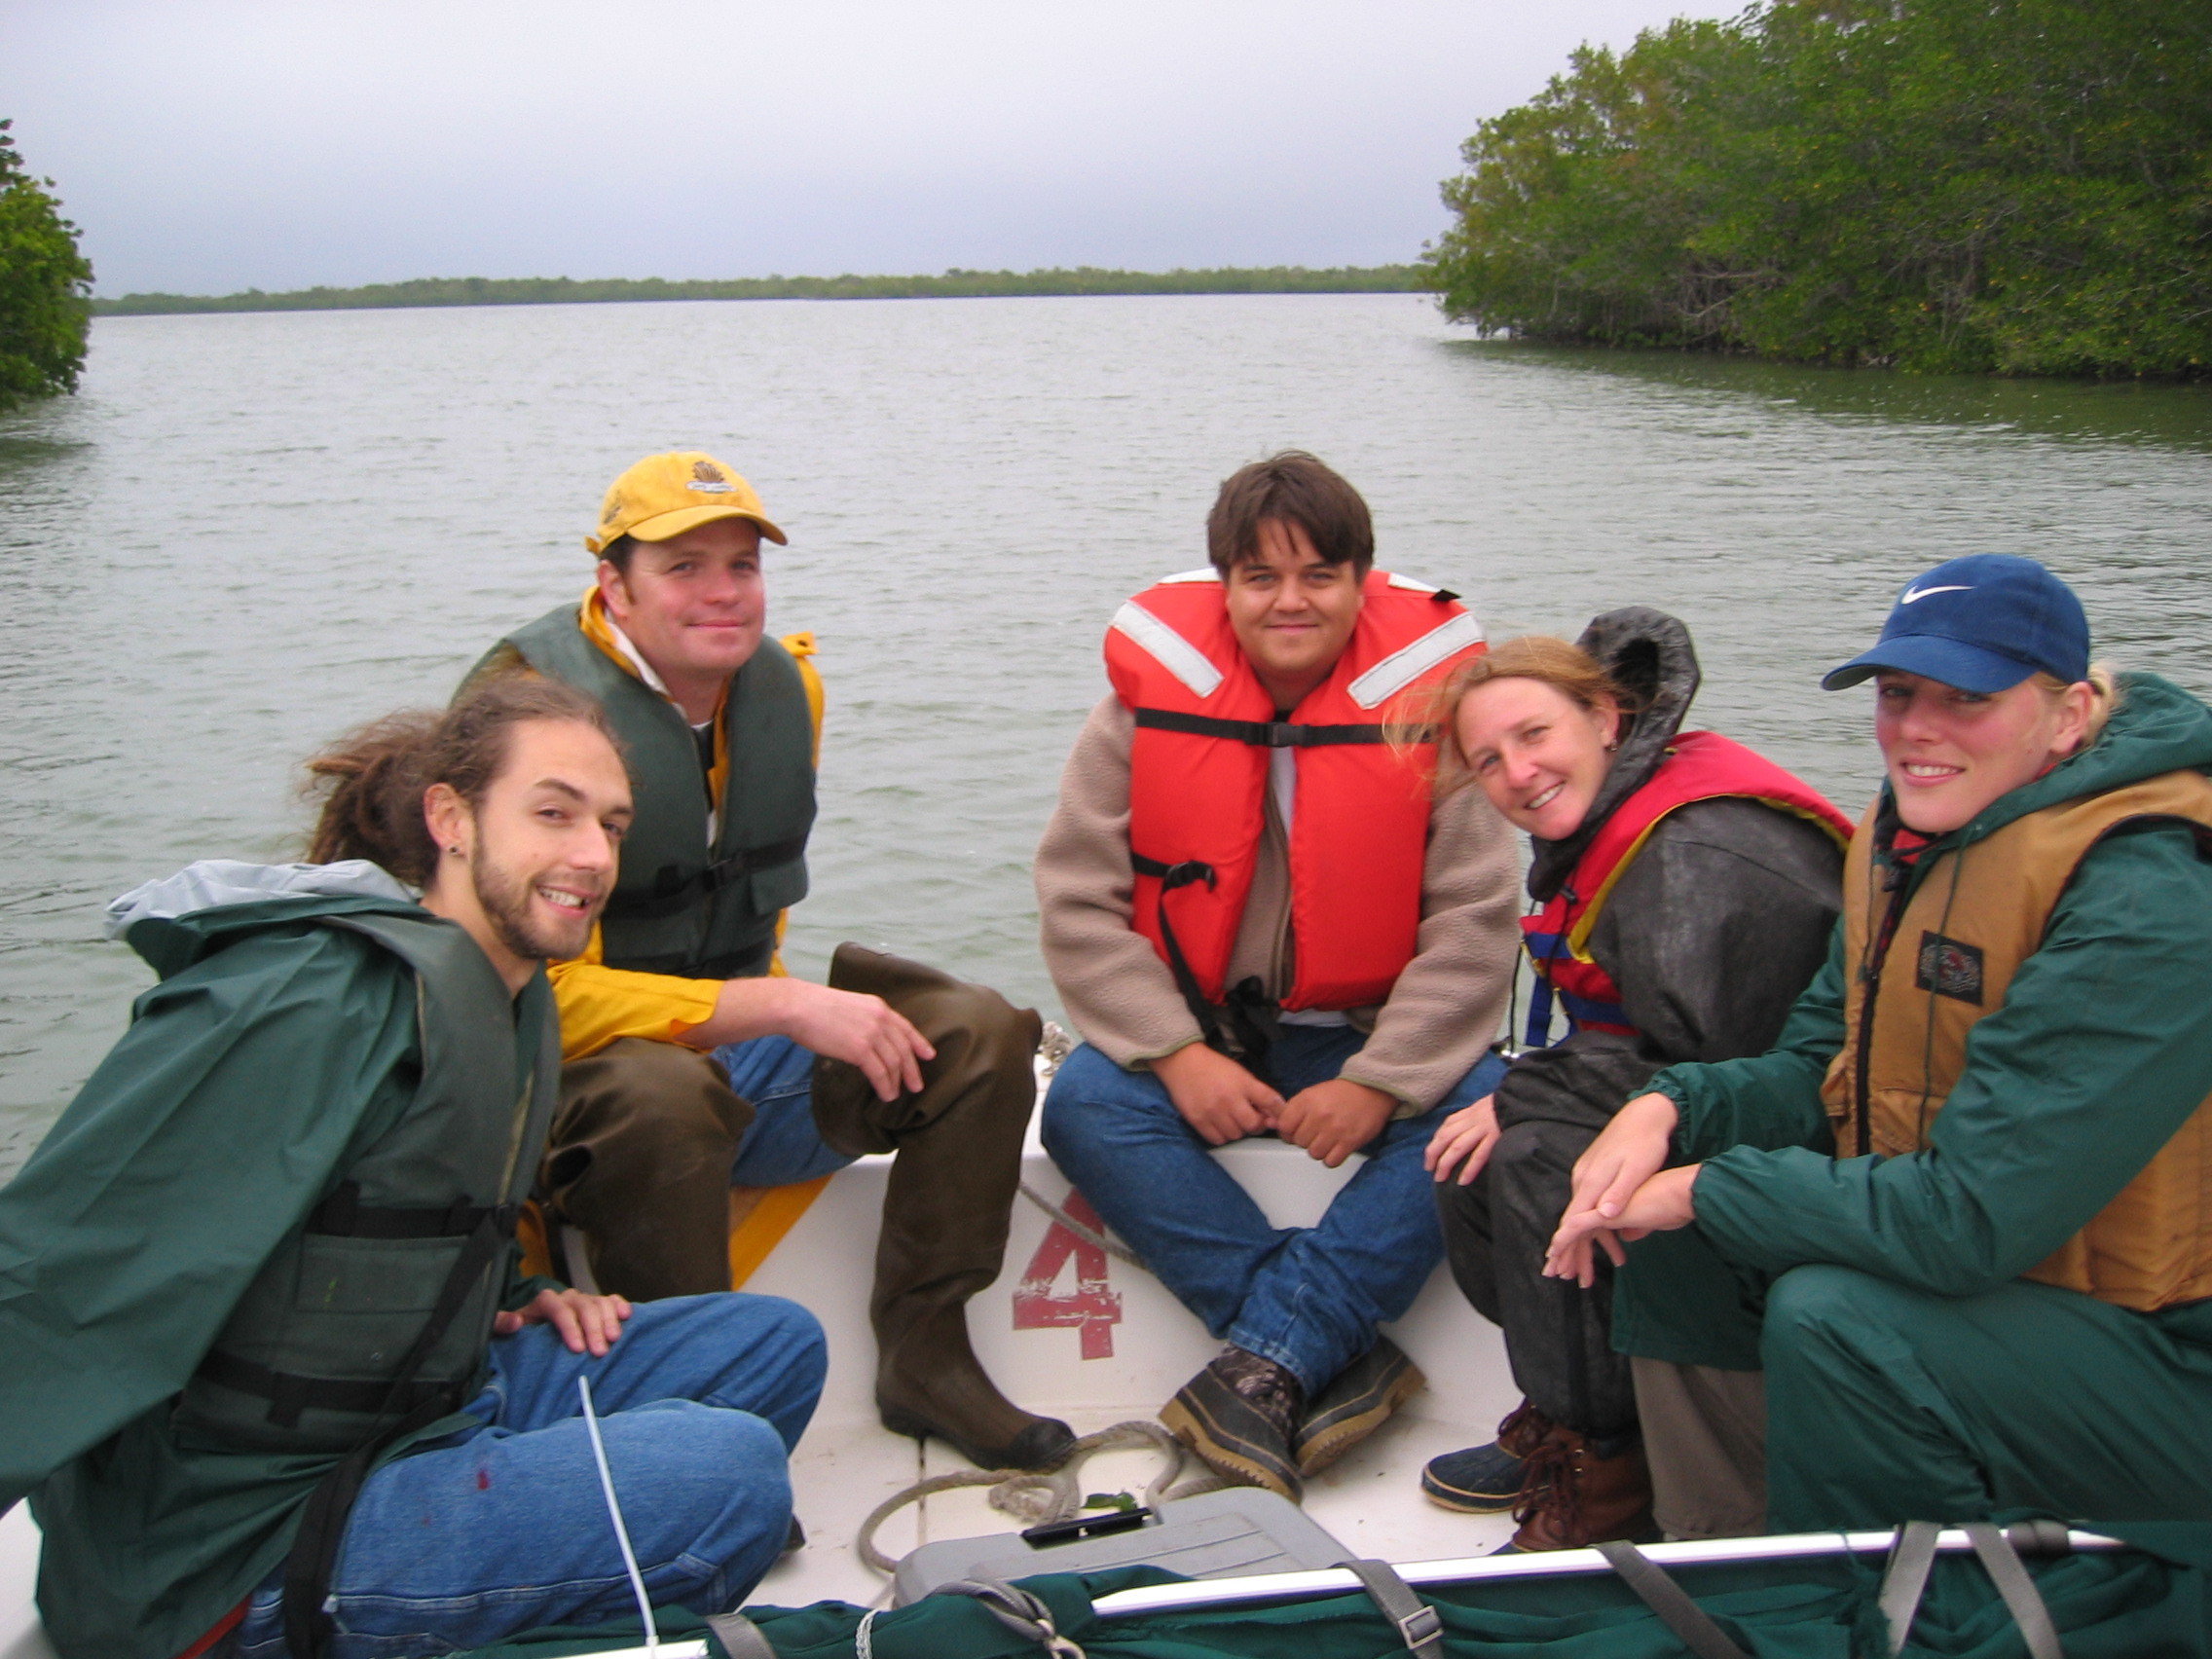 Left to right: Josh Cloutier, Dan Bond, Theo Vlaar, Nicole Poret, Kim de Mutsert in transit to measure forest structure at TS/Ph-8 in Taylor Slough